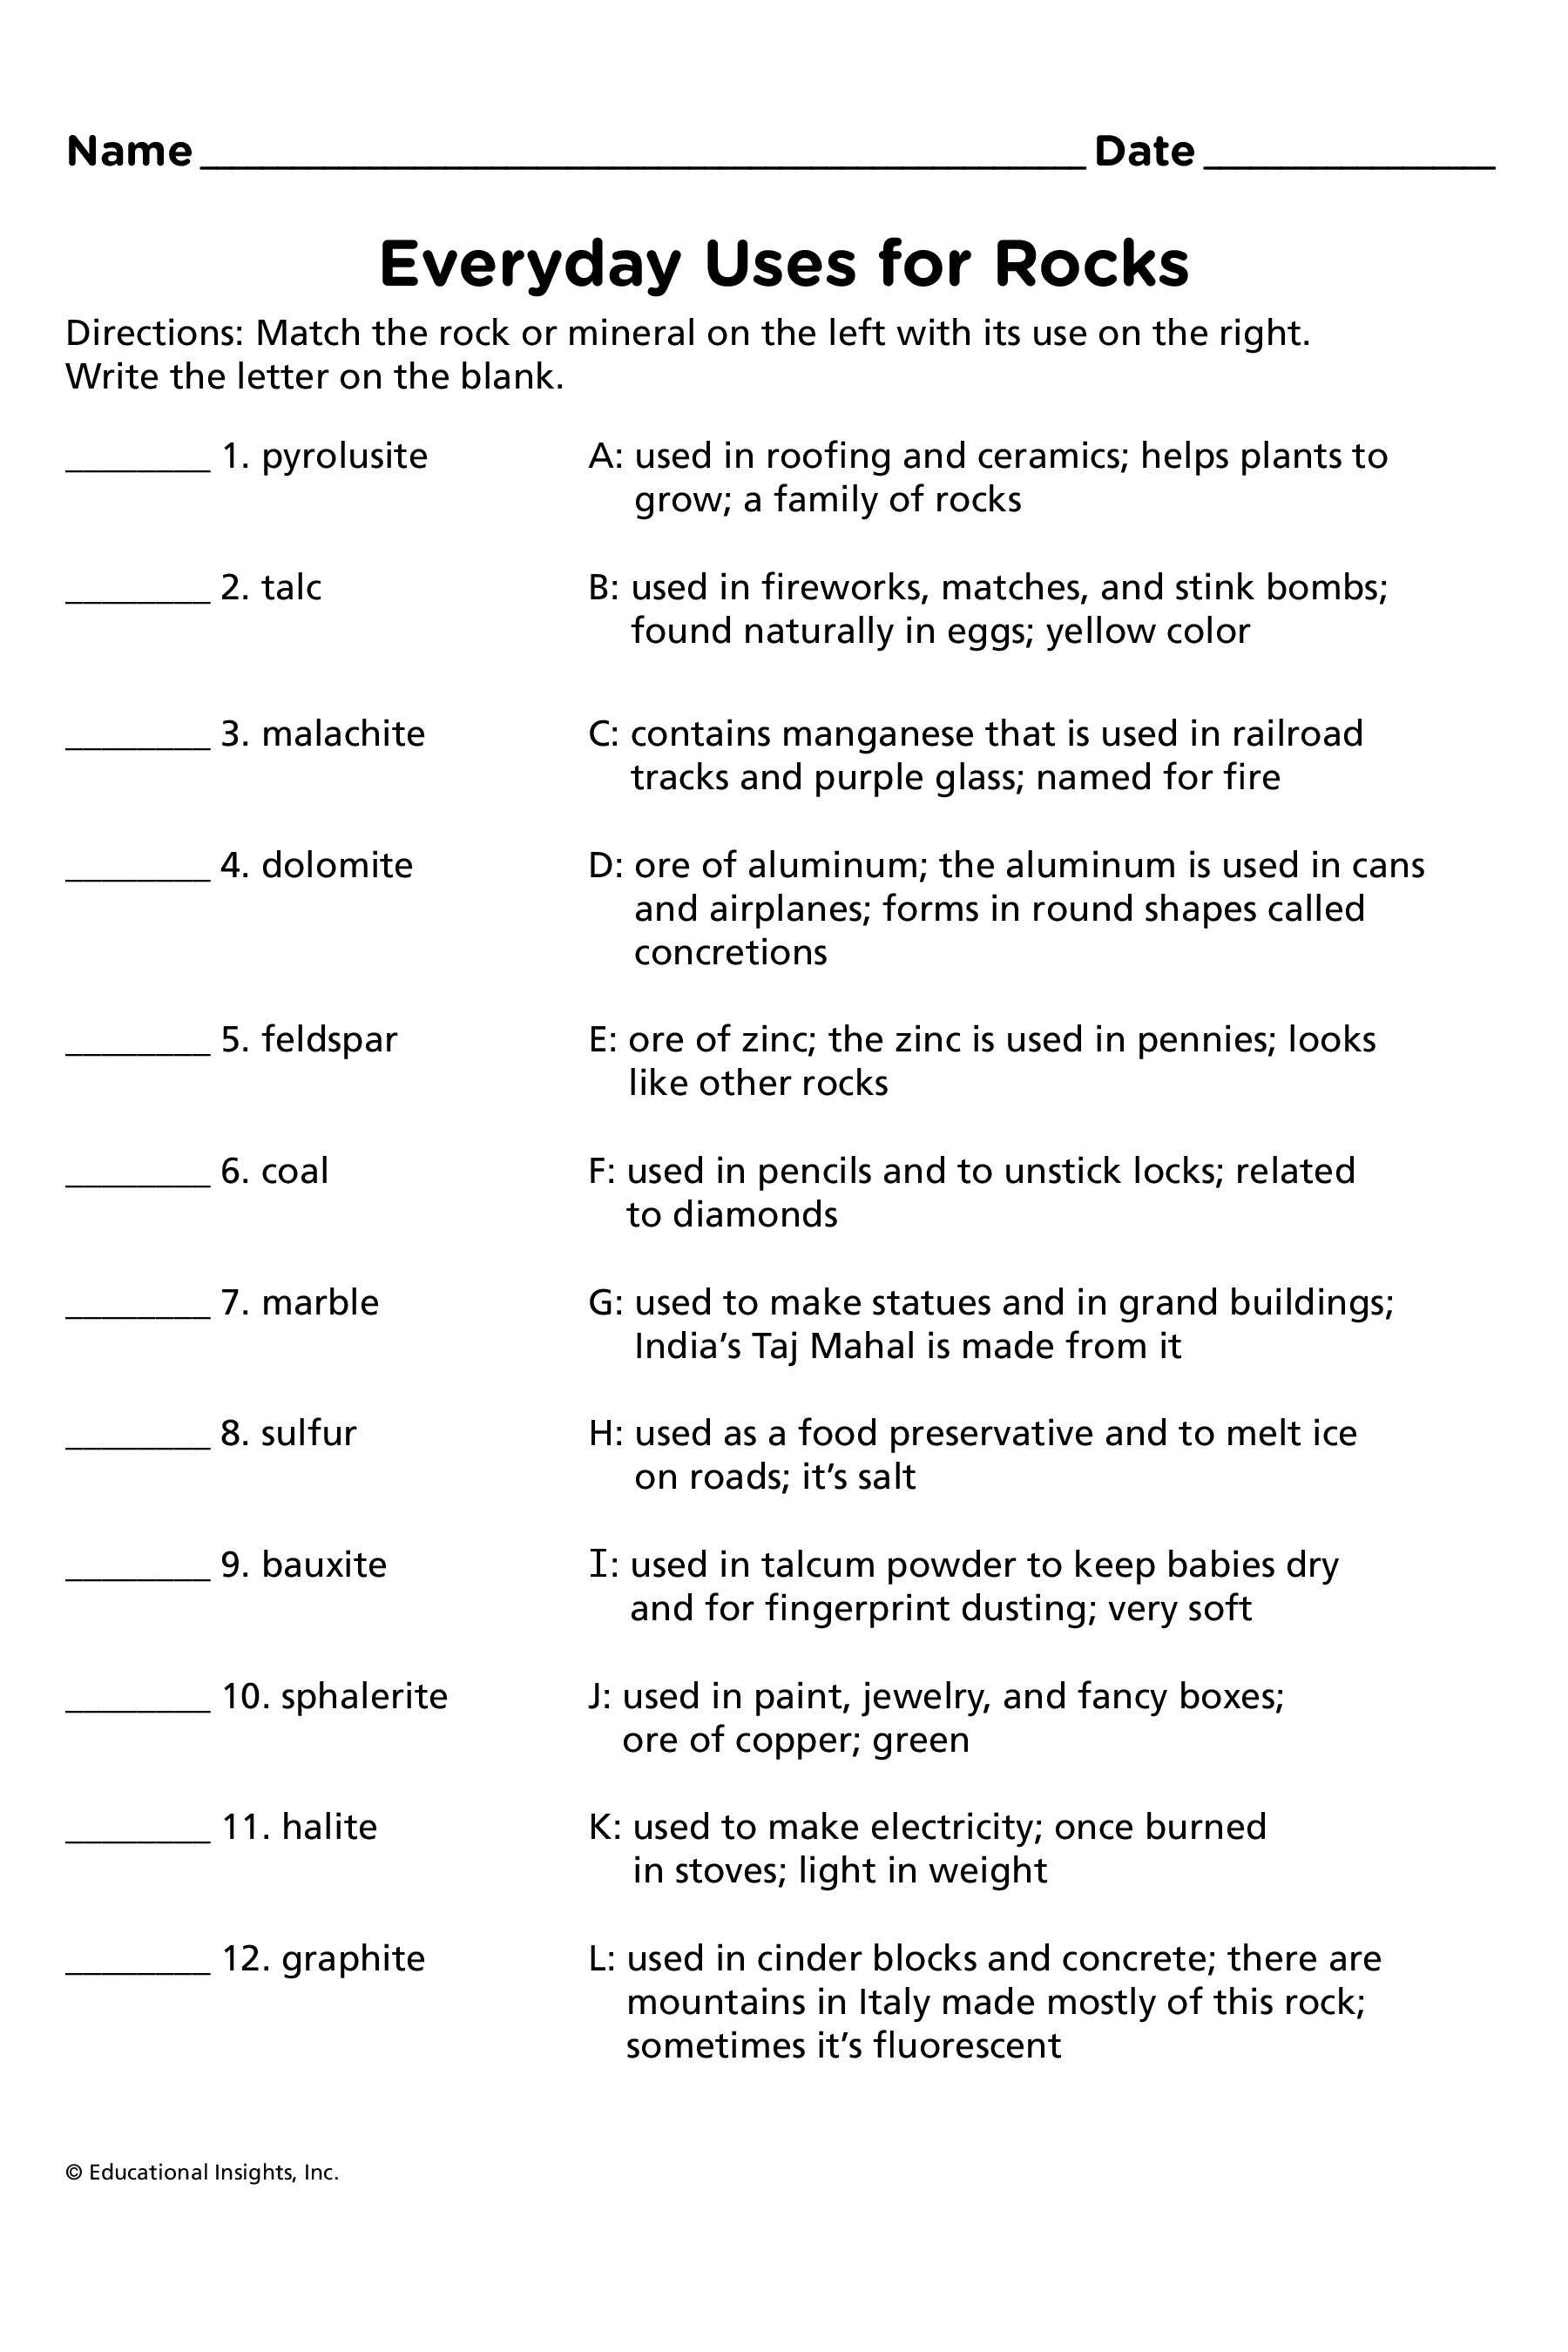 Conduction Convection or Radiation Worksheet Answers or Physical Science Work Worksheet Best Everyday Uses Rock & Card Set